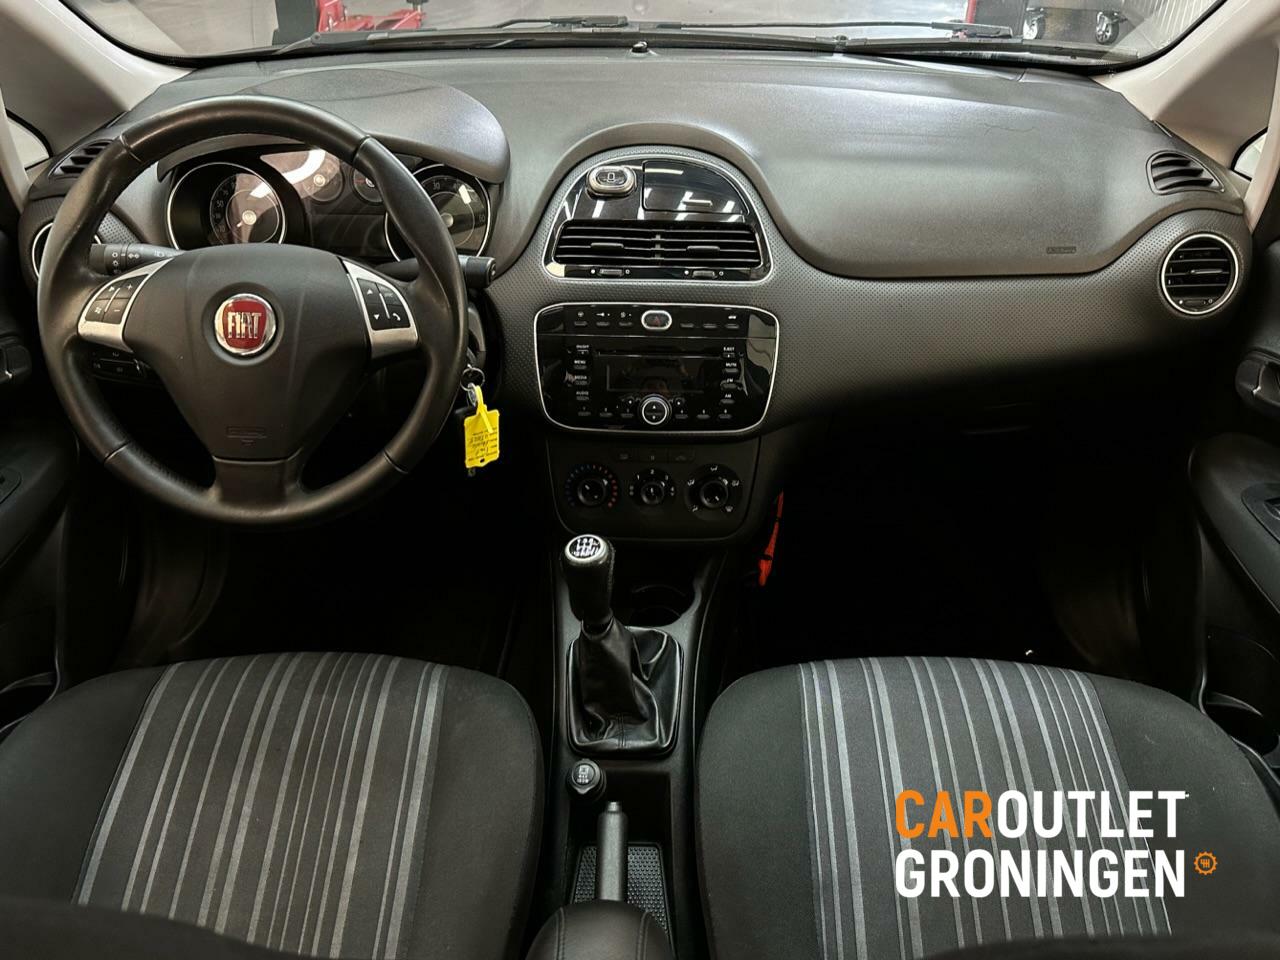 Caroutlet Groningen - Fiat Punto Evo 1.3 M-Jet Mylife | 5 DRS | AIRCO | CRUISE CONTROL